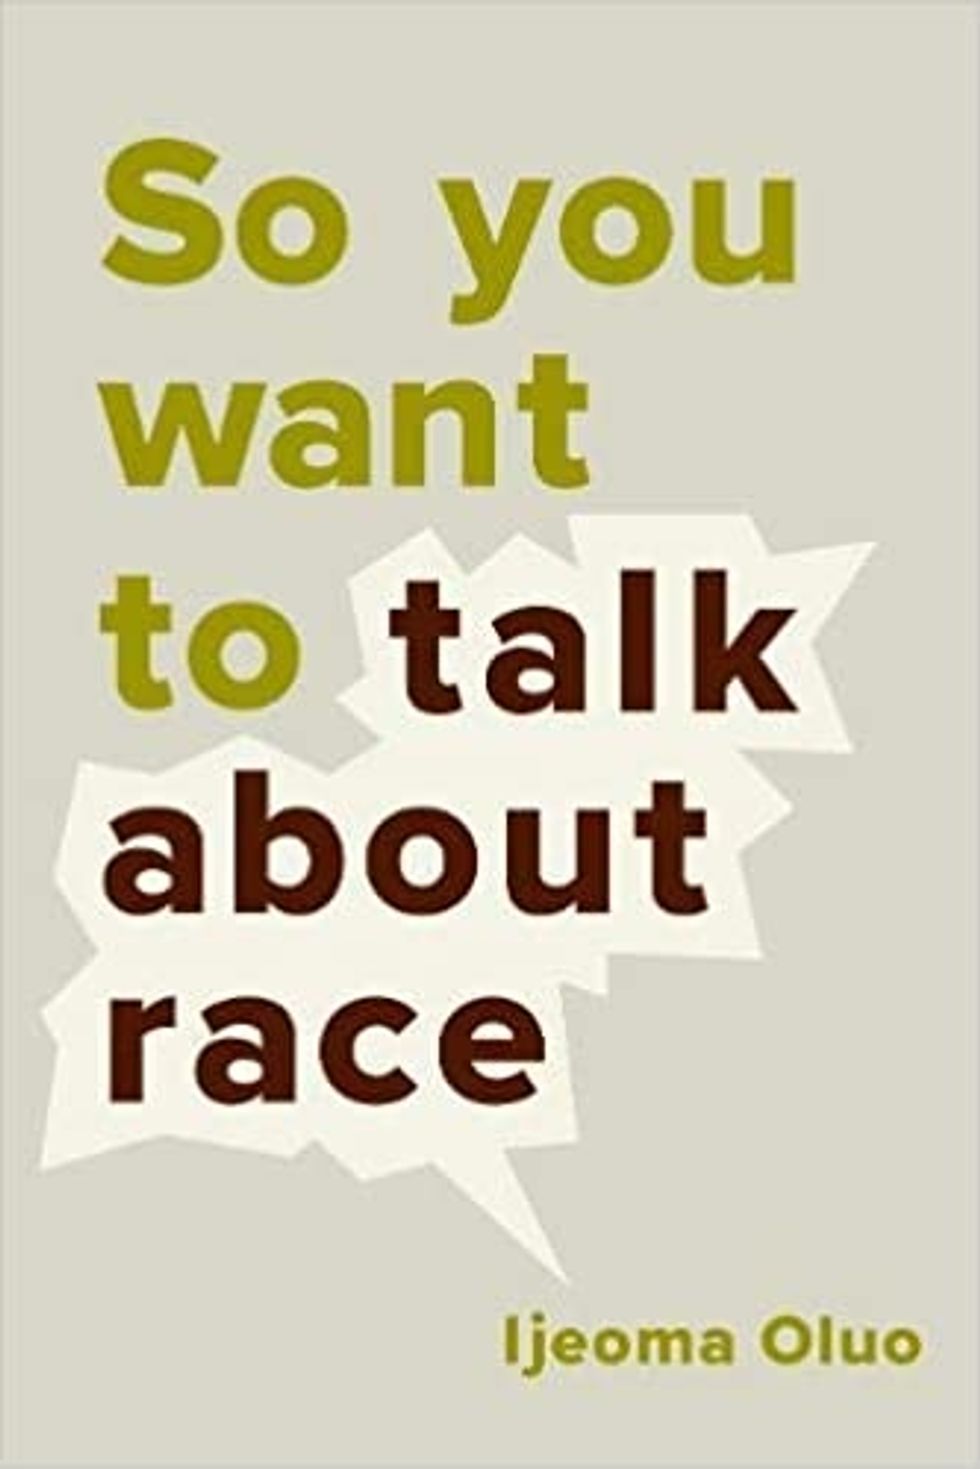 So you want to talk about race ijeoma oluo